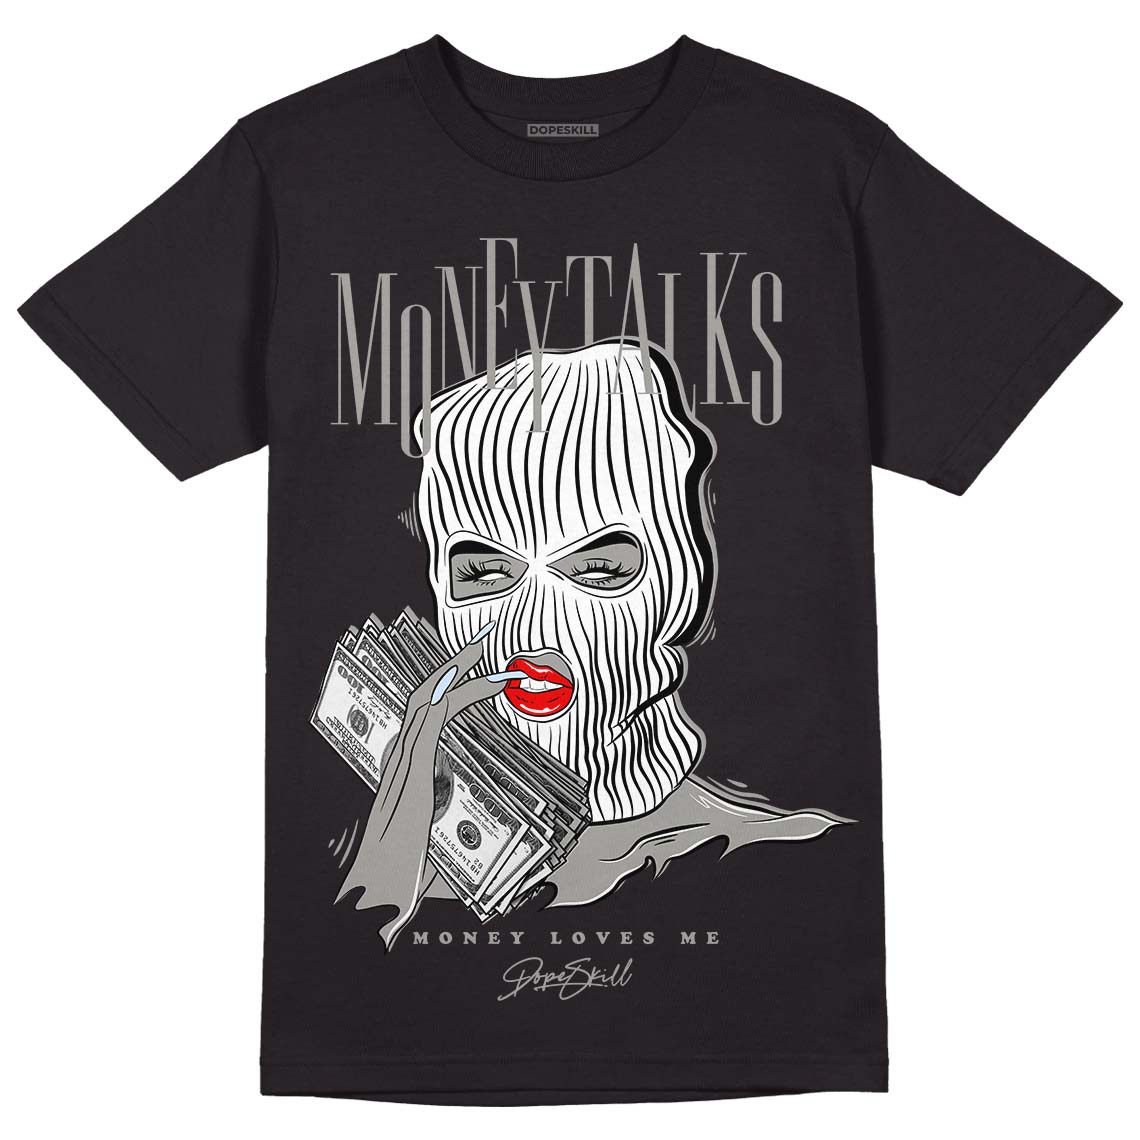 Cool Grey 11s DopeSkill T-Shirt Money Talks Graphic, hiphop tees, grey graphic tees, sneakers match shirt - Black